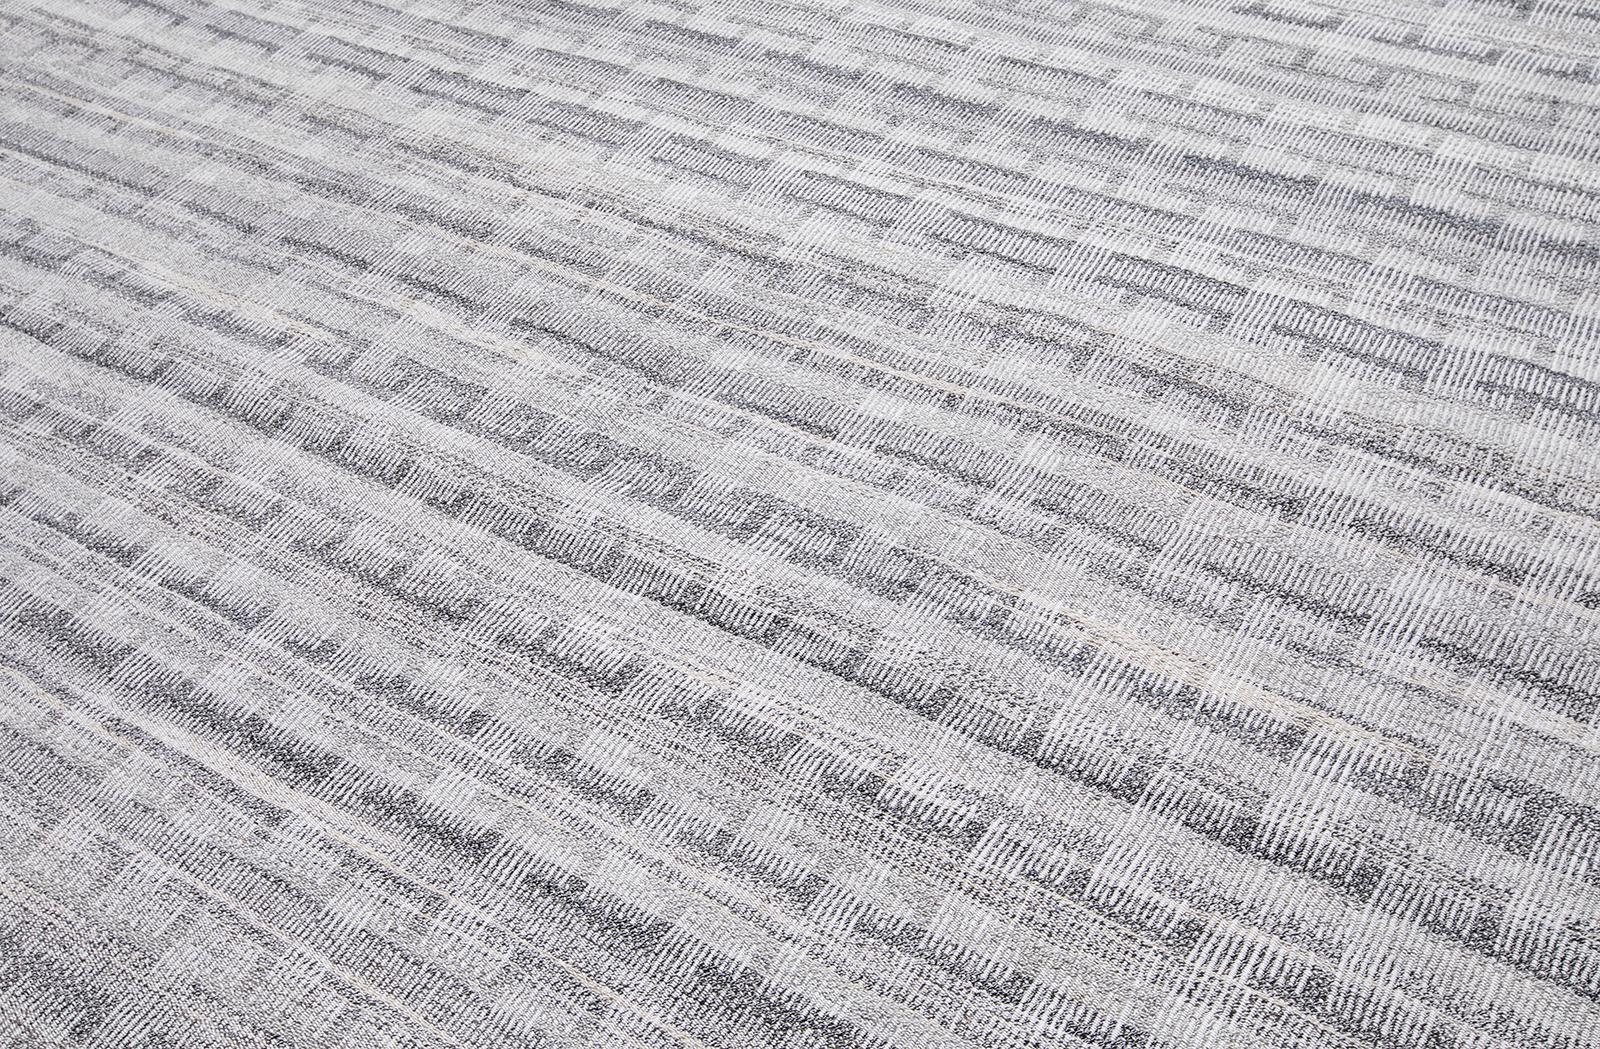 This modern flat-weave rug is crafted with hand-carded, hand-spun wool and cotton using ancient weaving techniques by village artisan craftsmen in Afghanistan. Custom sizes and colors available. Rug size: 10' x 13'11